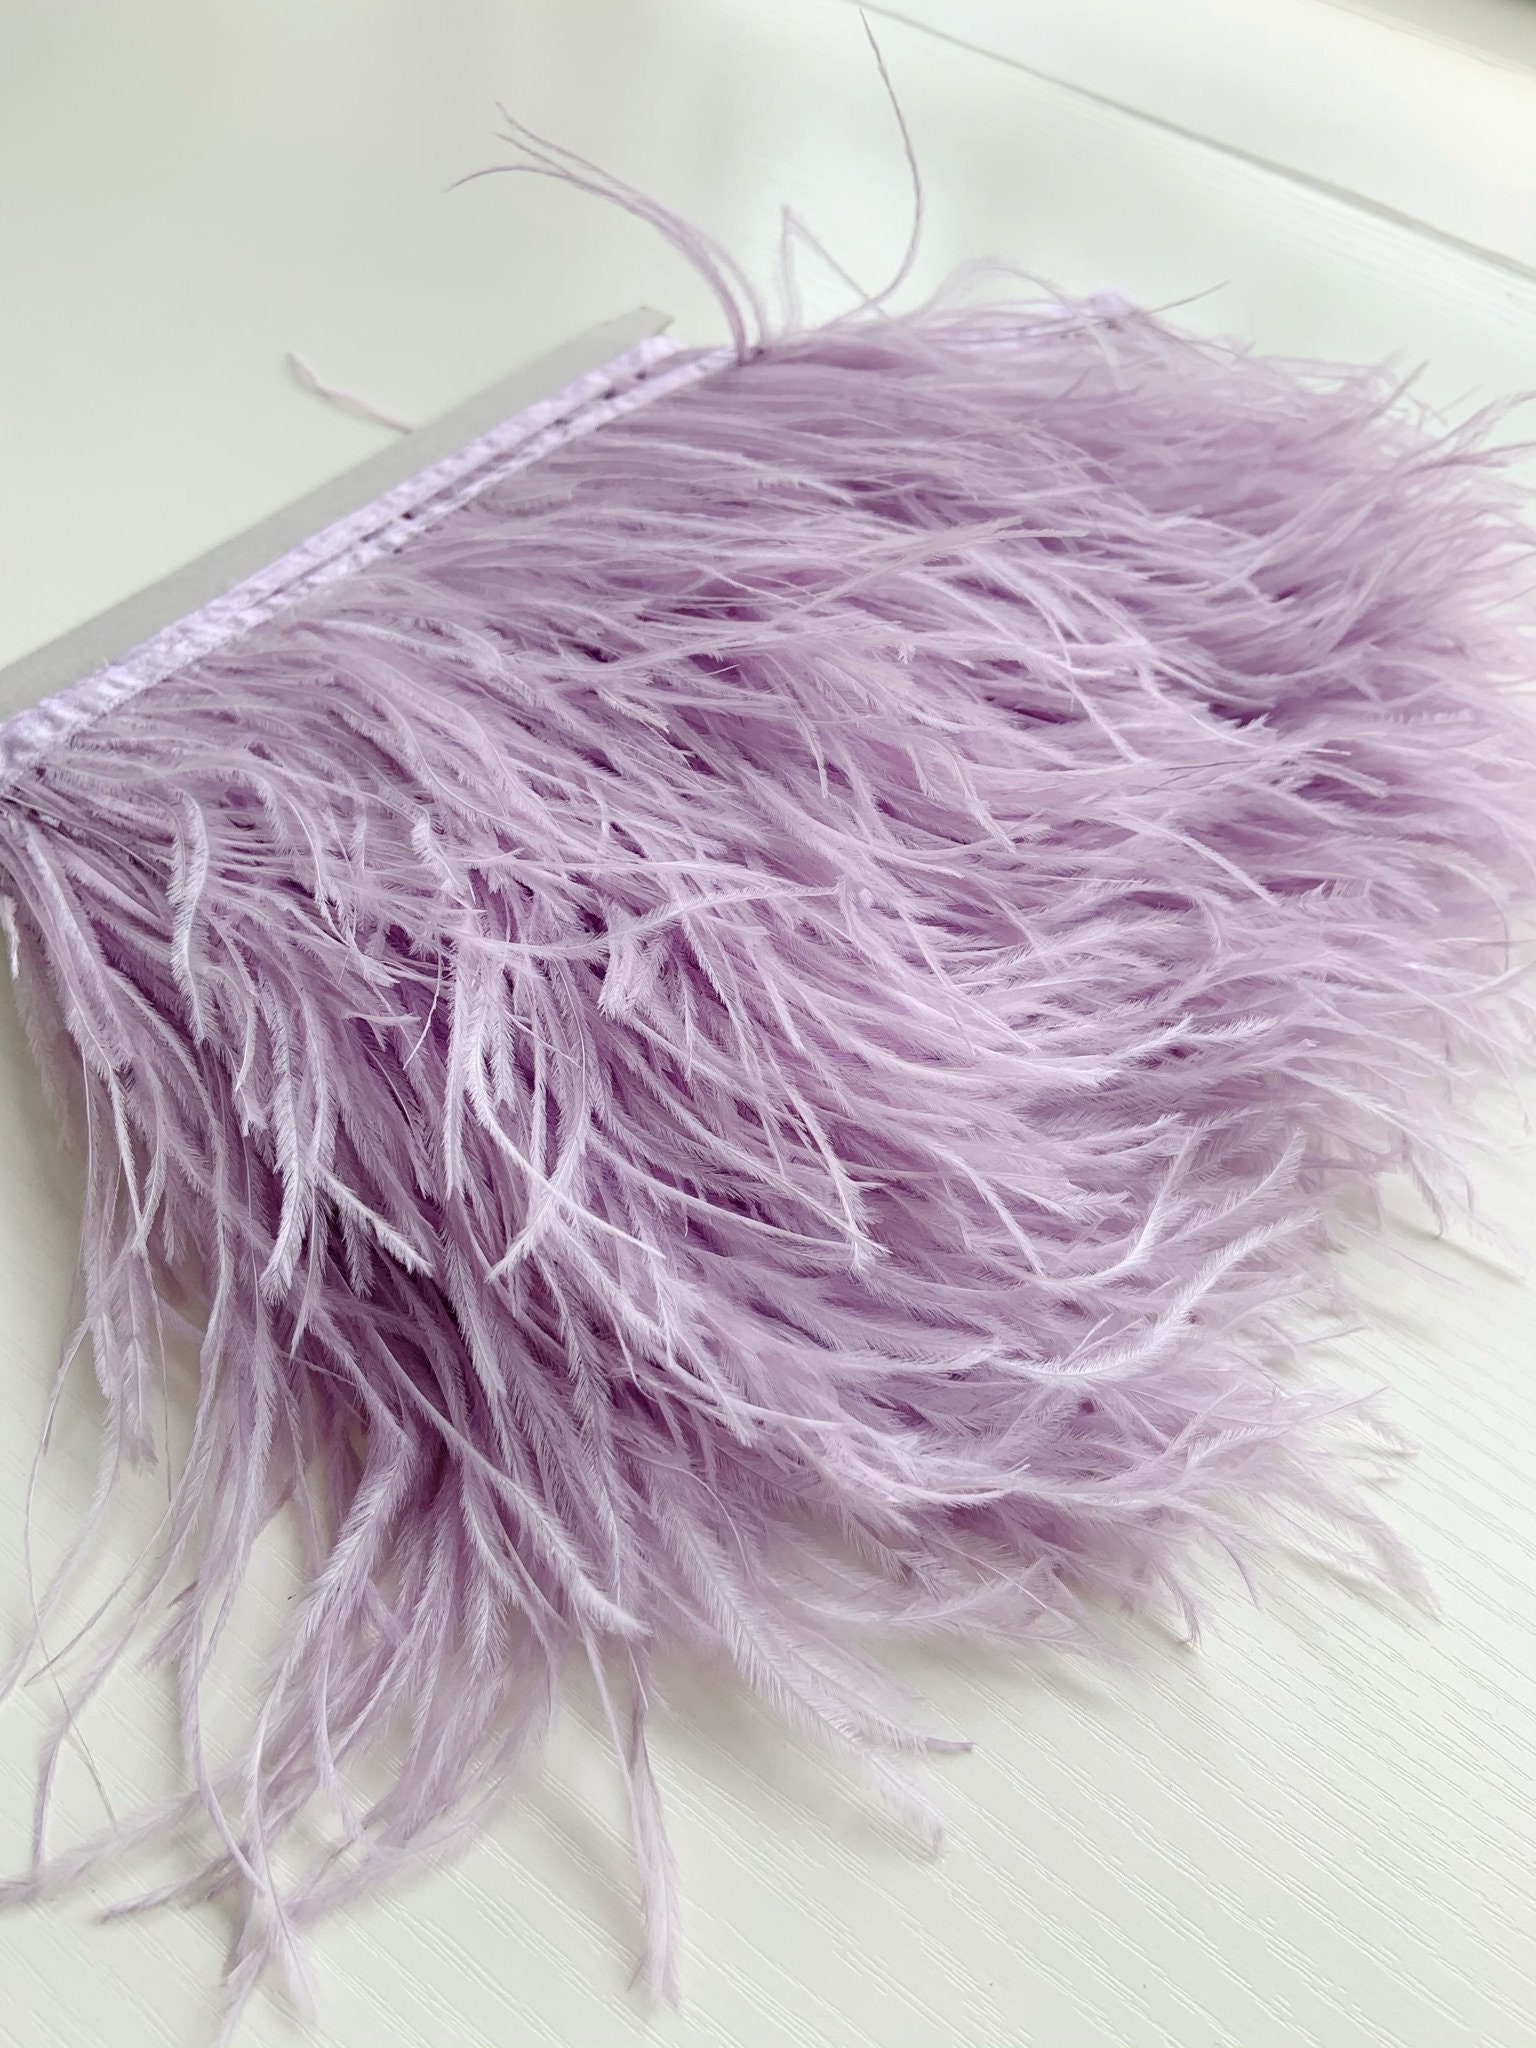 KOLIGHT 10pcs Ostrich Feather Purple 12-14 Natural Feathers Wedding,  Party,Home,Hairs Decoration